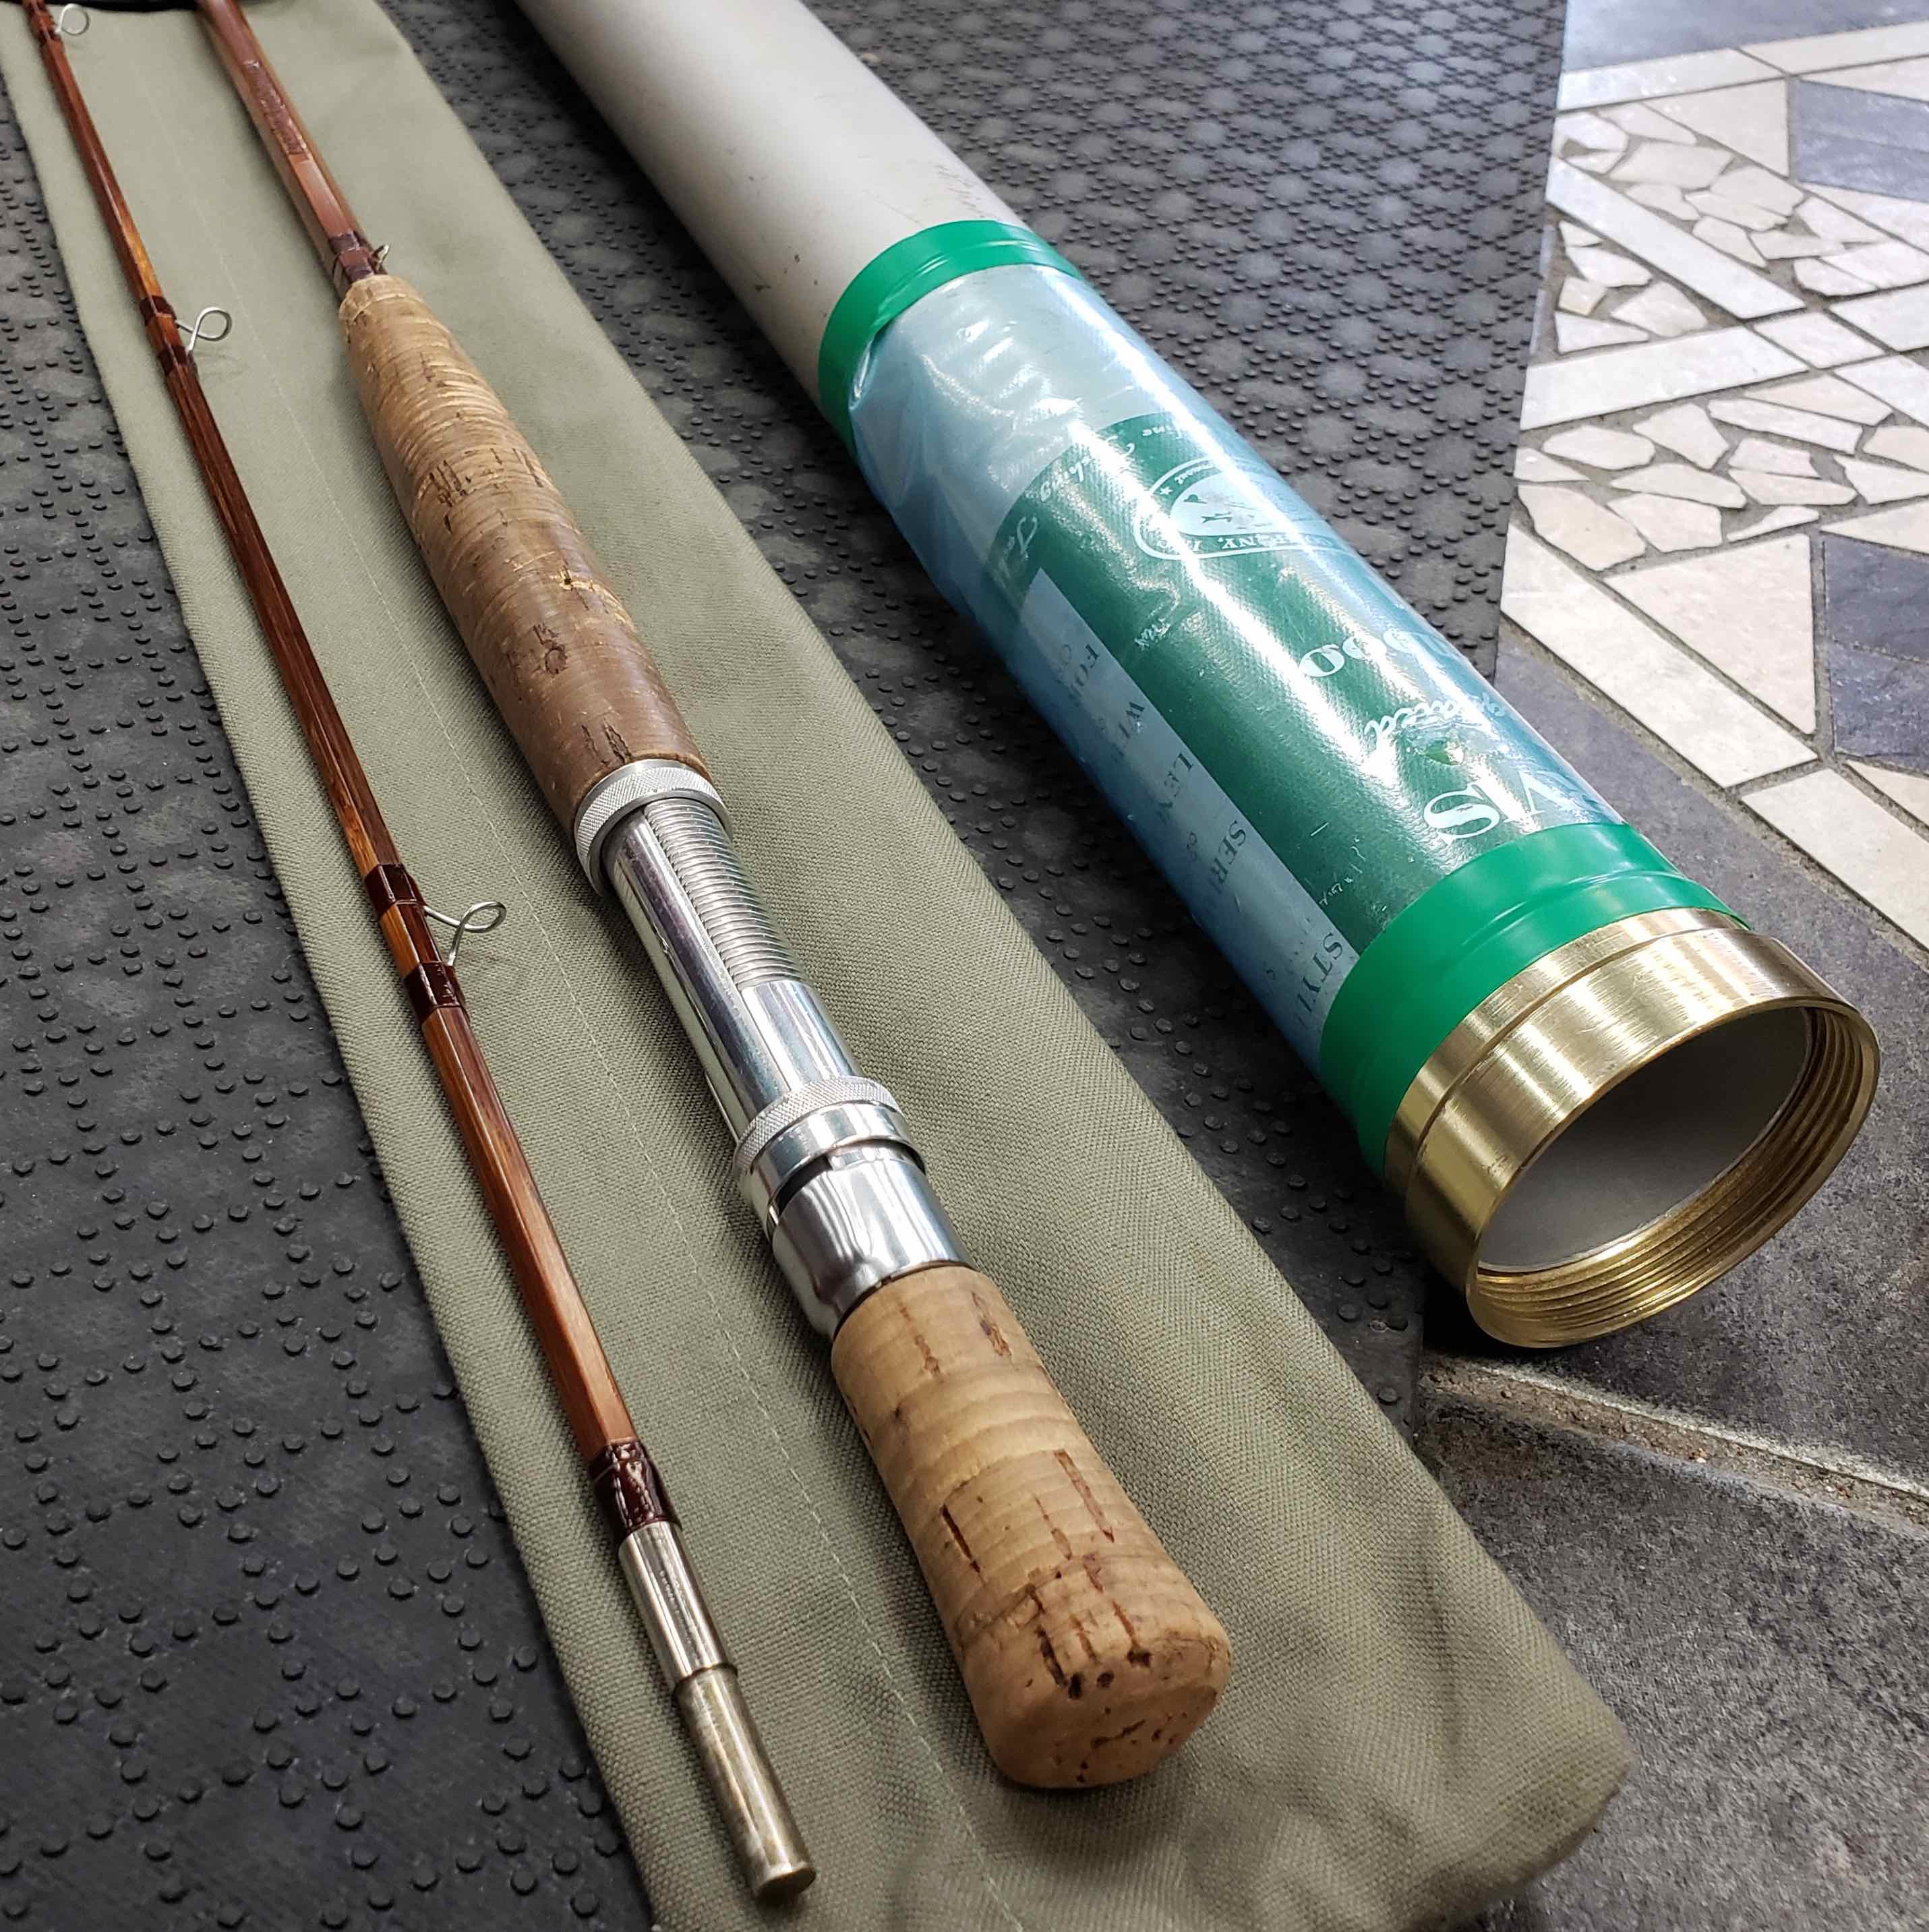 https://thefirstcast.ca/wp-content/uploads/2019/04/Orvis-Impregnated-Bamboo-Fly-Rod-2Piece-8-foot-9inch-10weight-BB.jpg